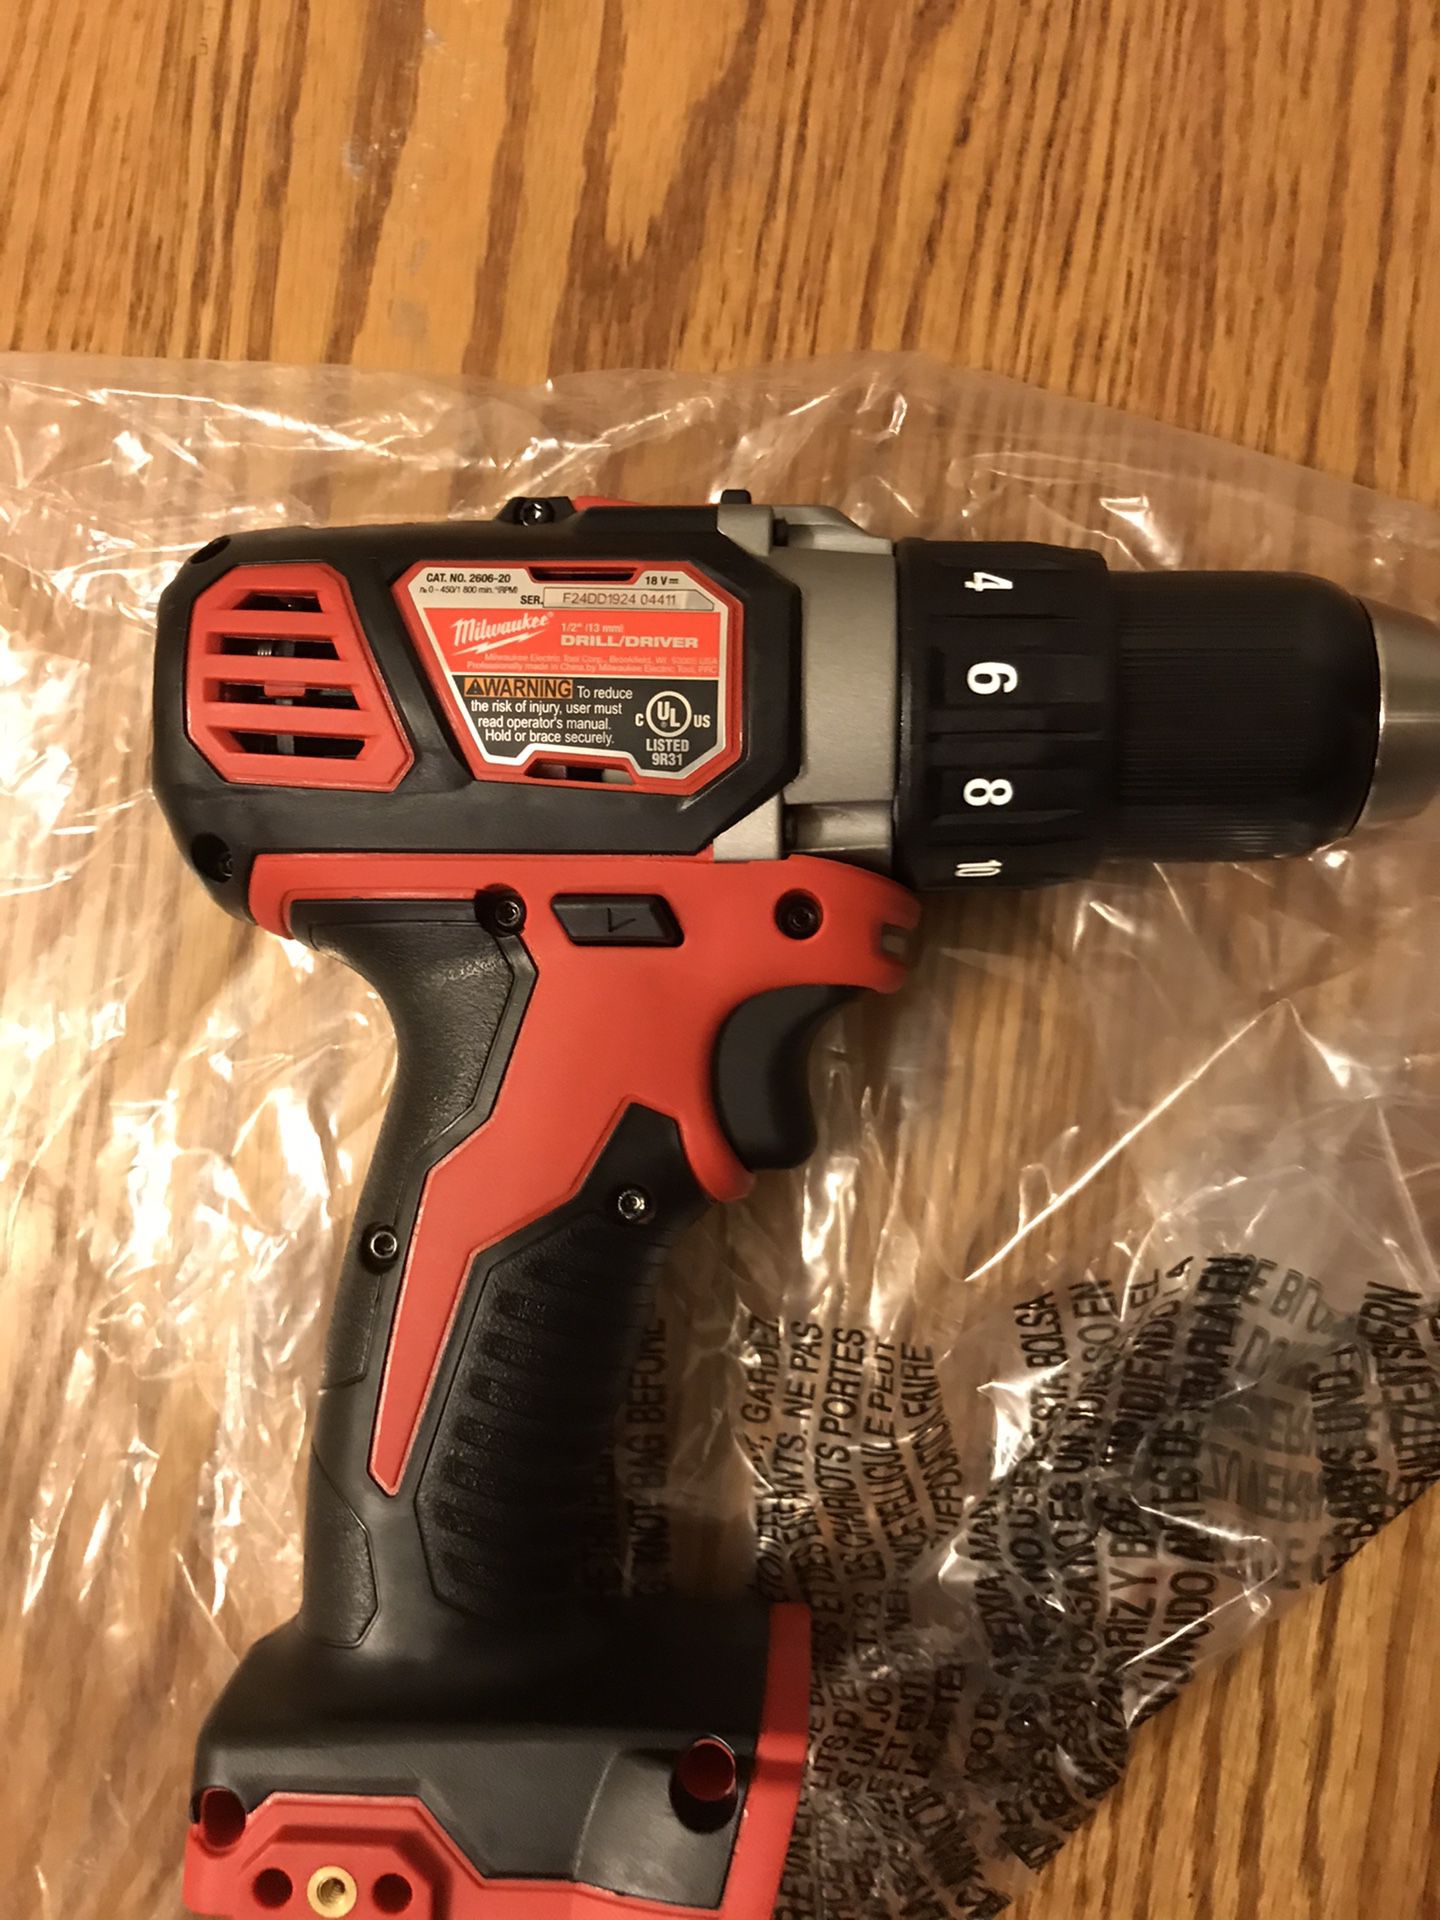 Brand new Milwaukee M18 drill. Tool only. $50 firm Check out my other items for sale. Pick up in Lombard